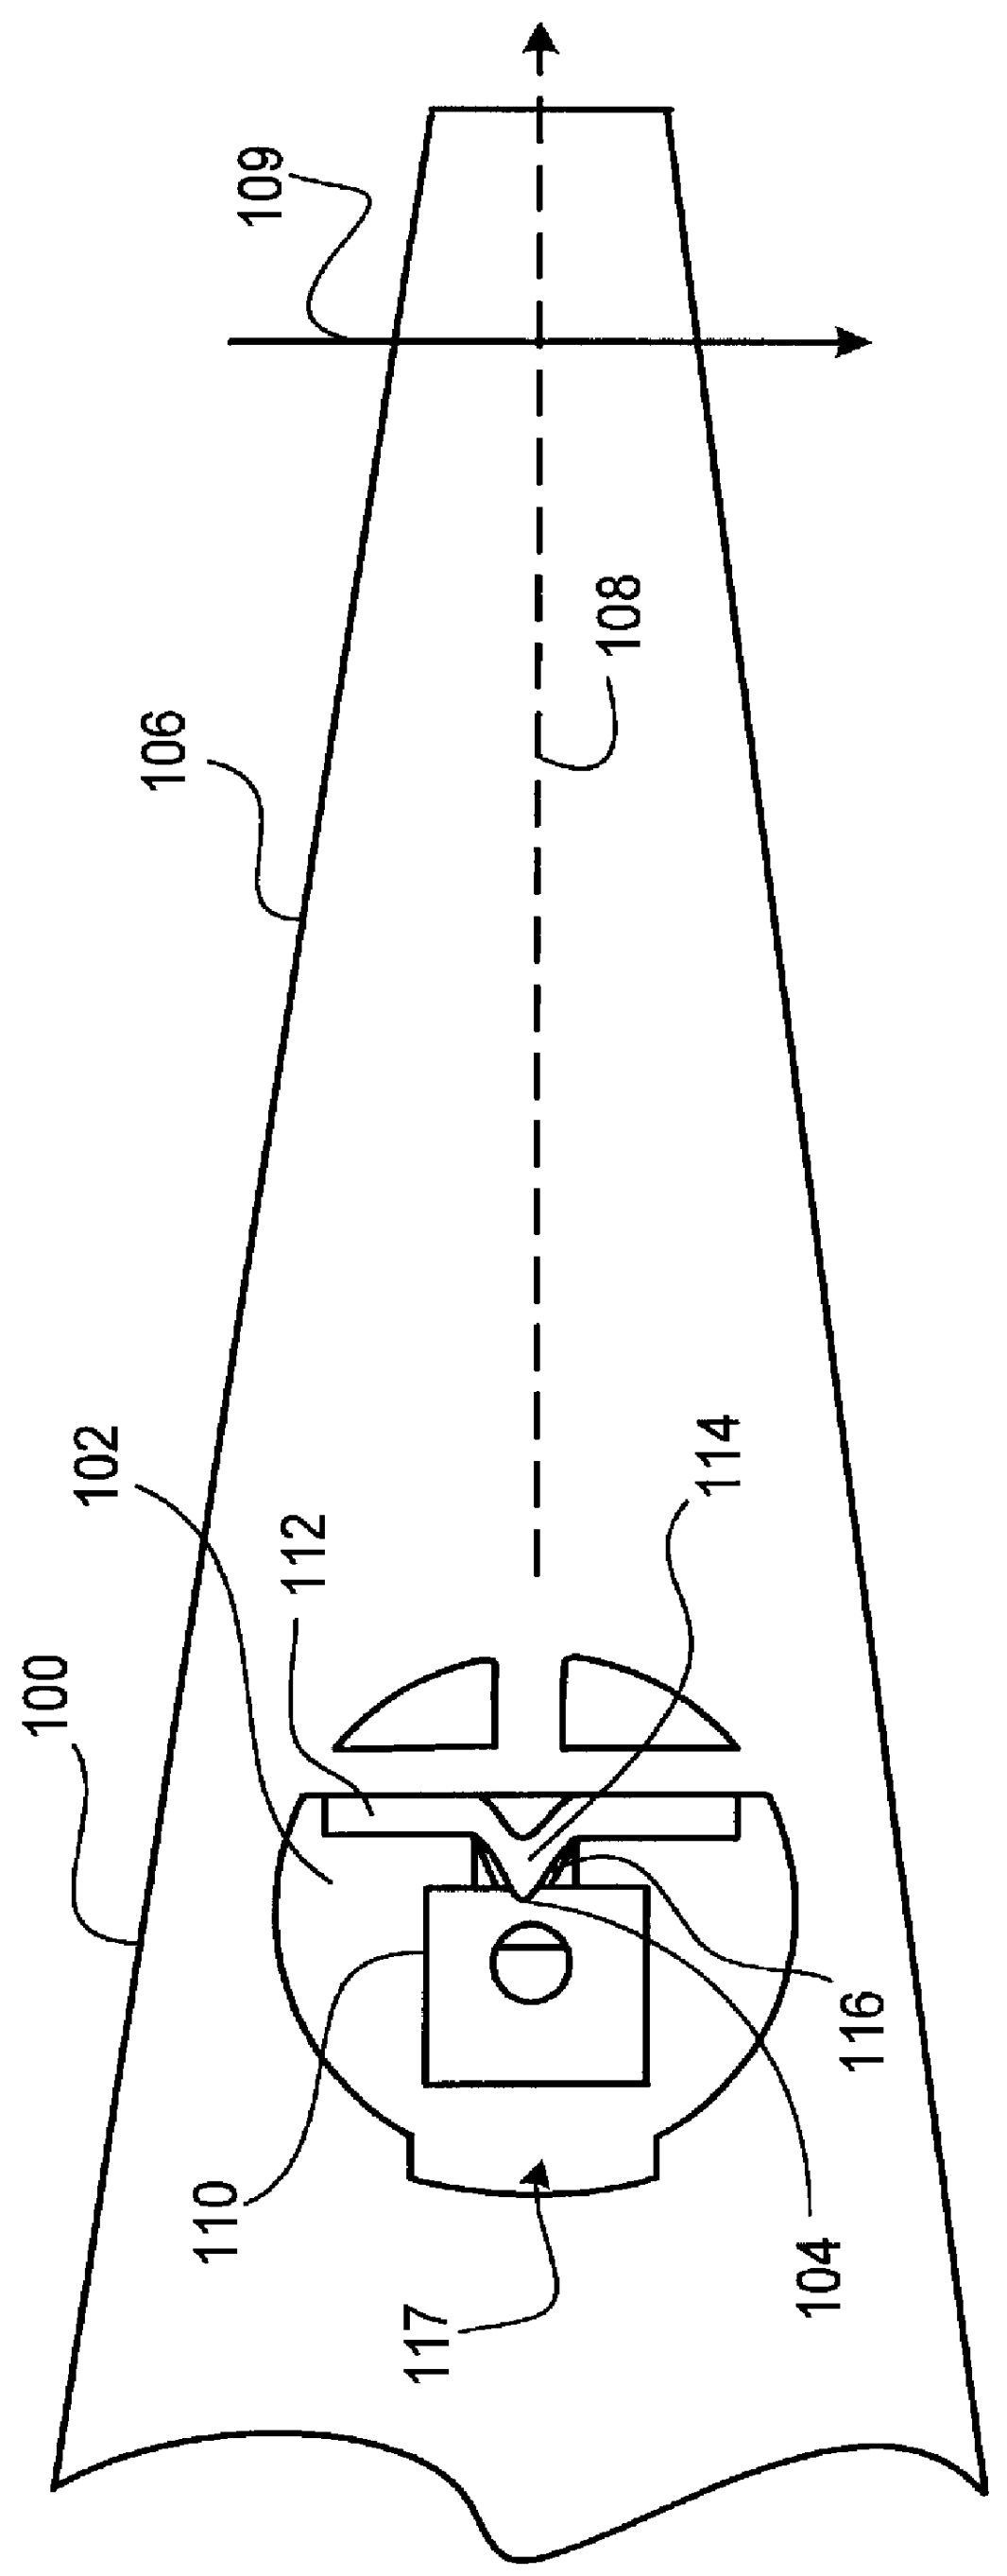 Disk drive having a pivot assembly which defines a knife edge facing in a direction perpendicular to the longitudinal axis of an actuator arm